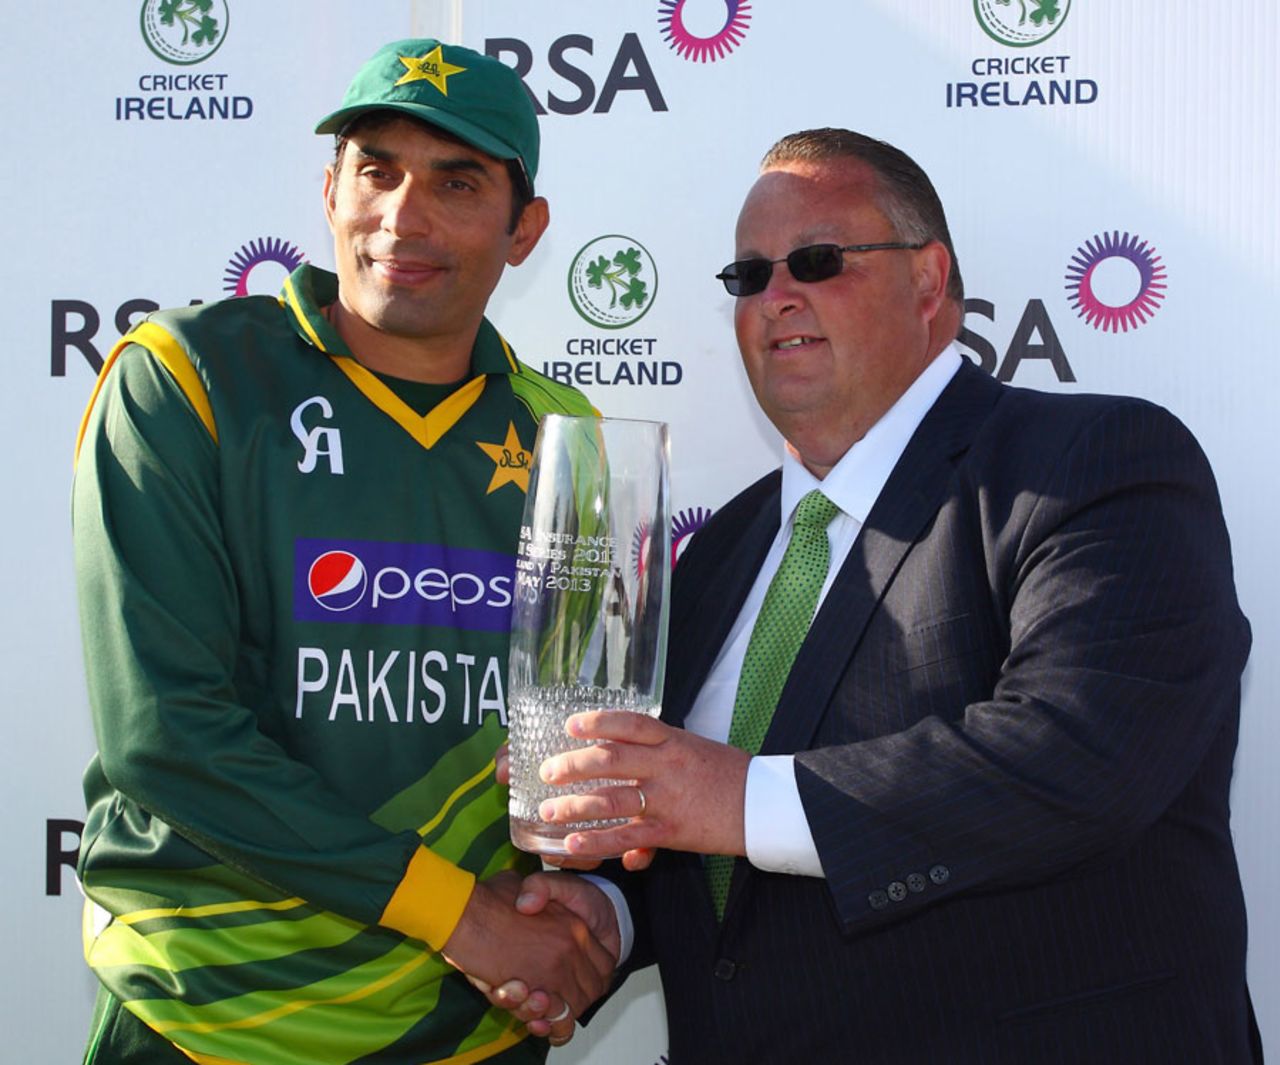 Misbah ul-haq with the series trophy, Dublin, May 26, 2013